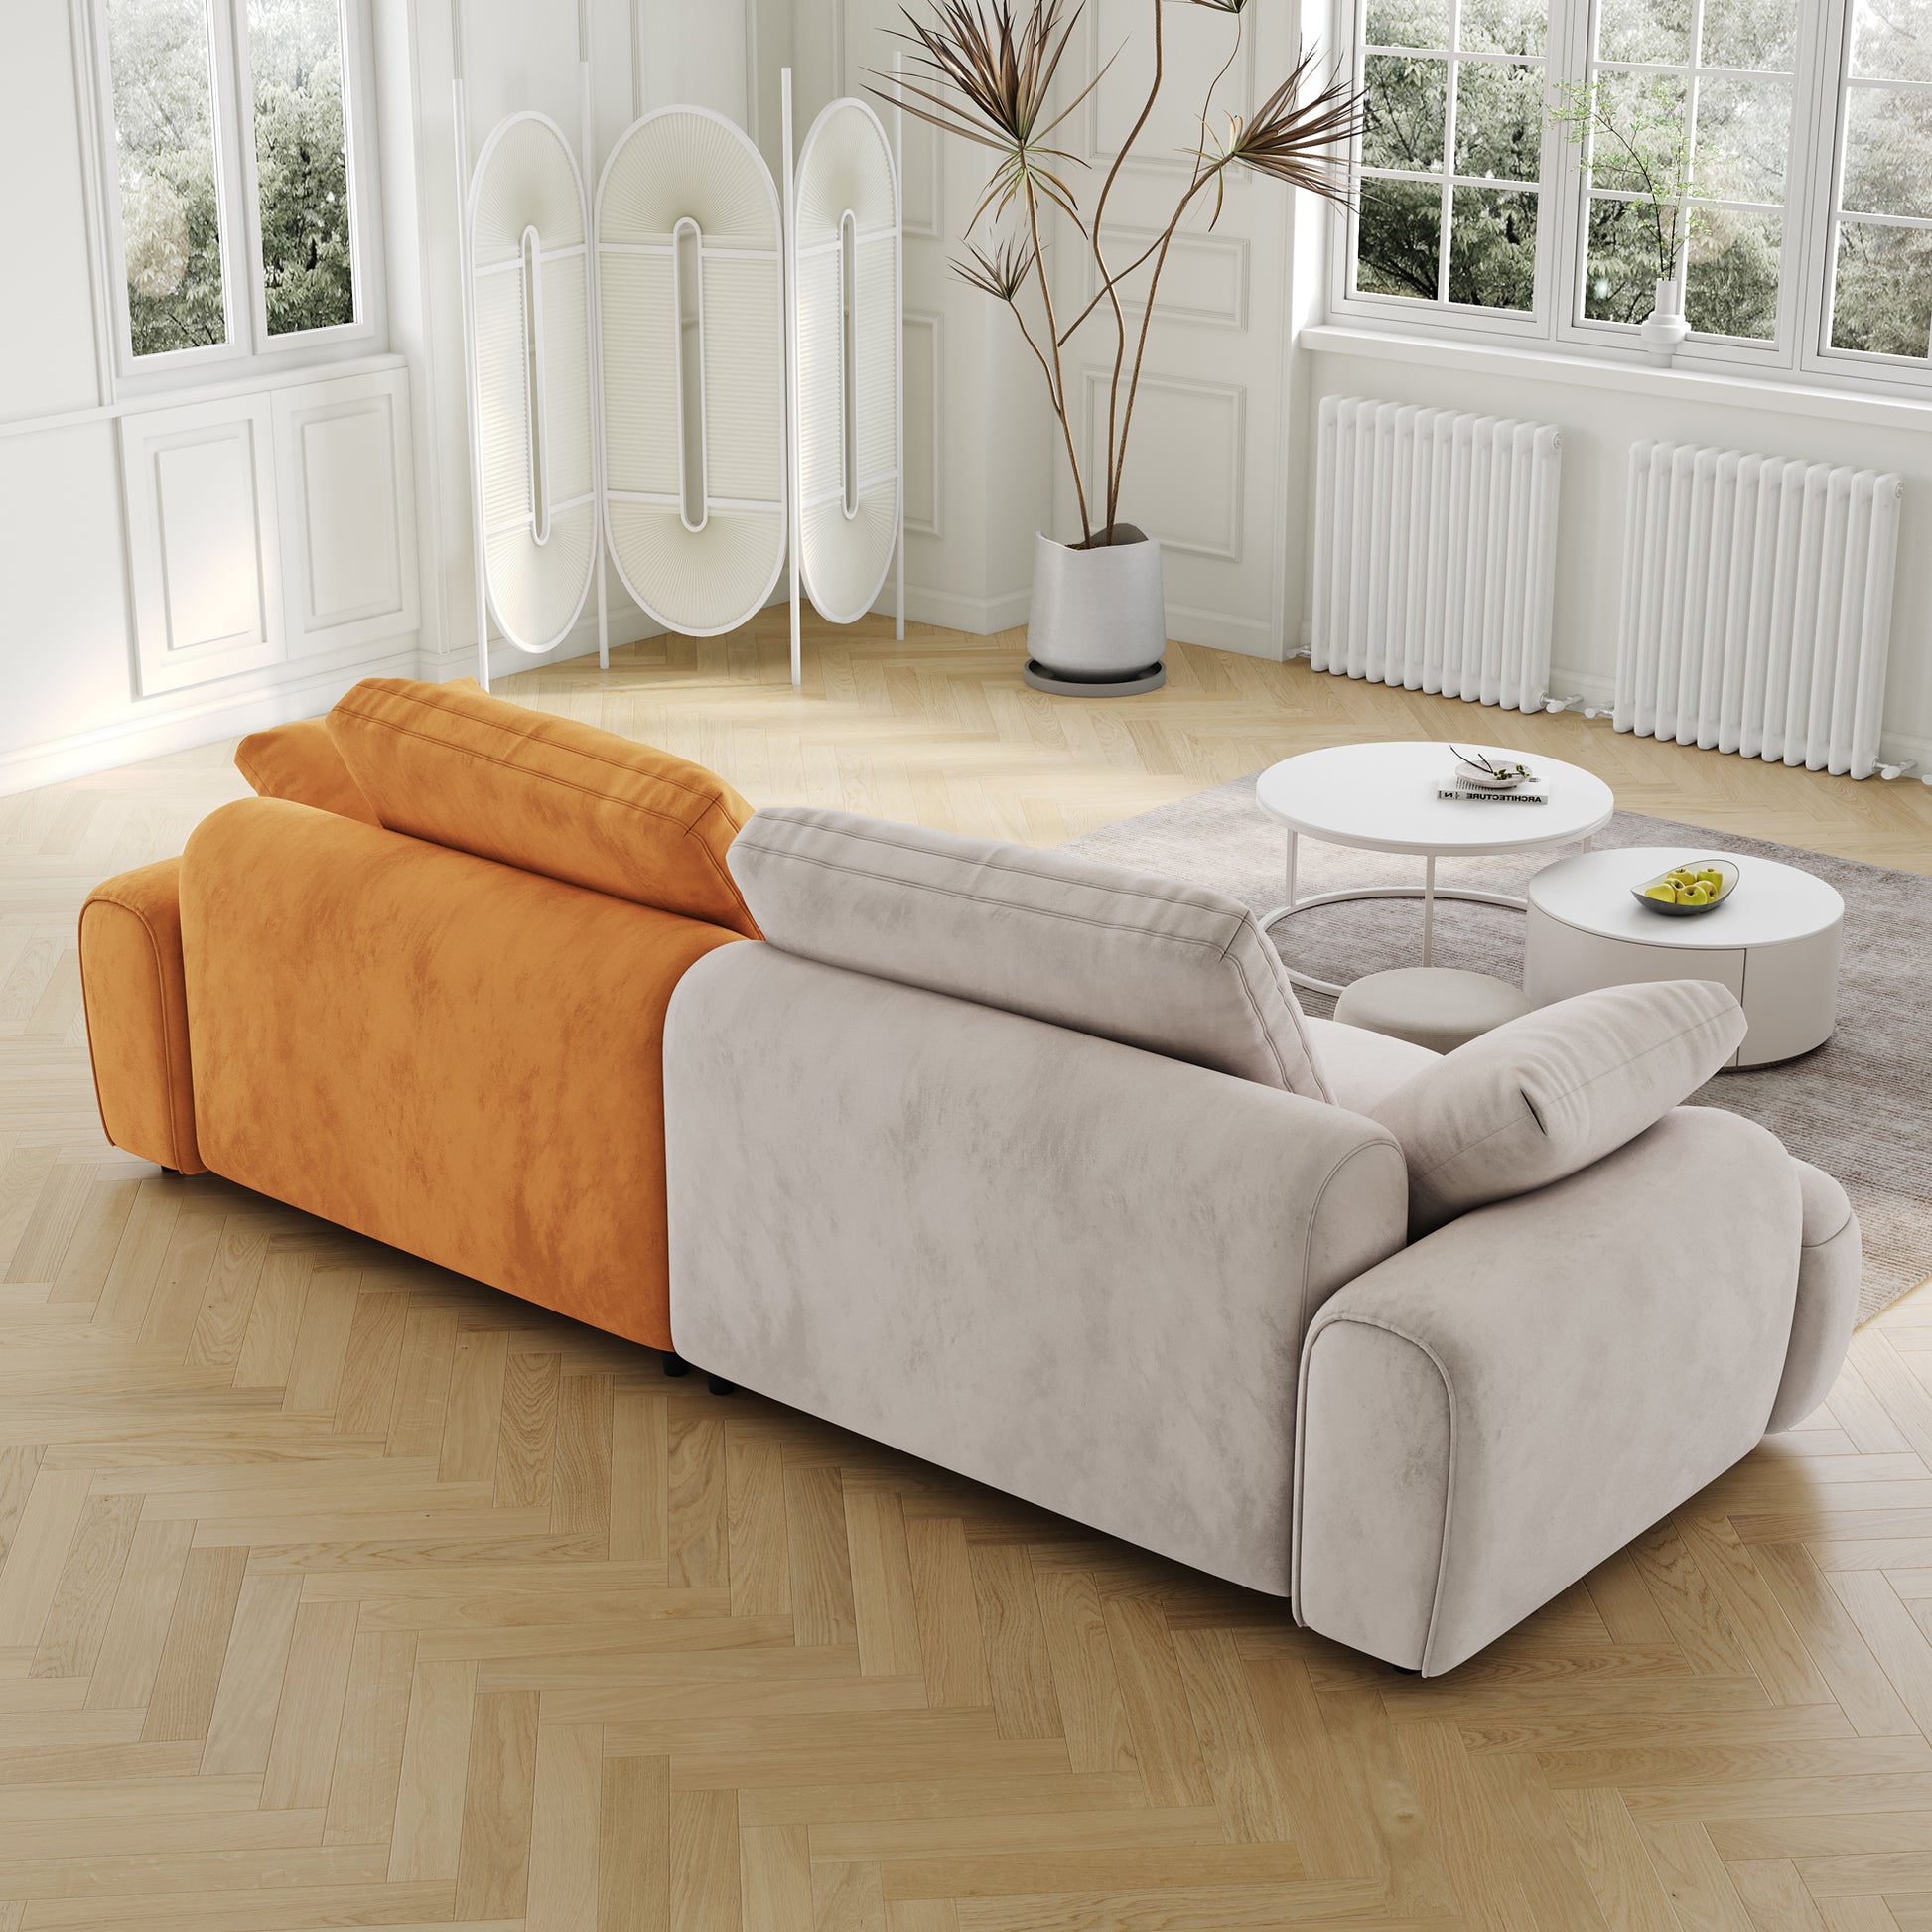 Modern Upholstered, Beige yellow suede fabric